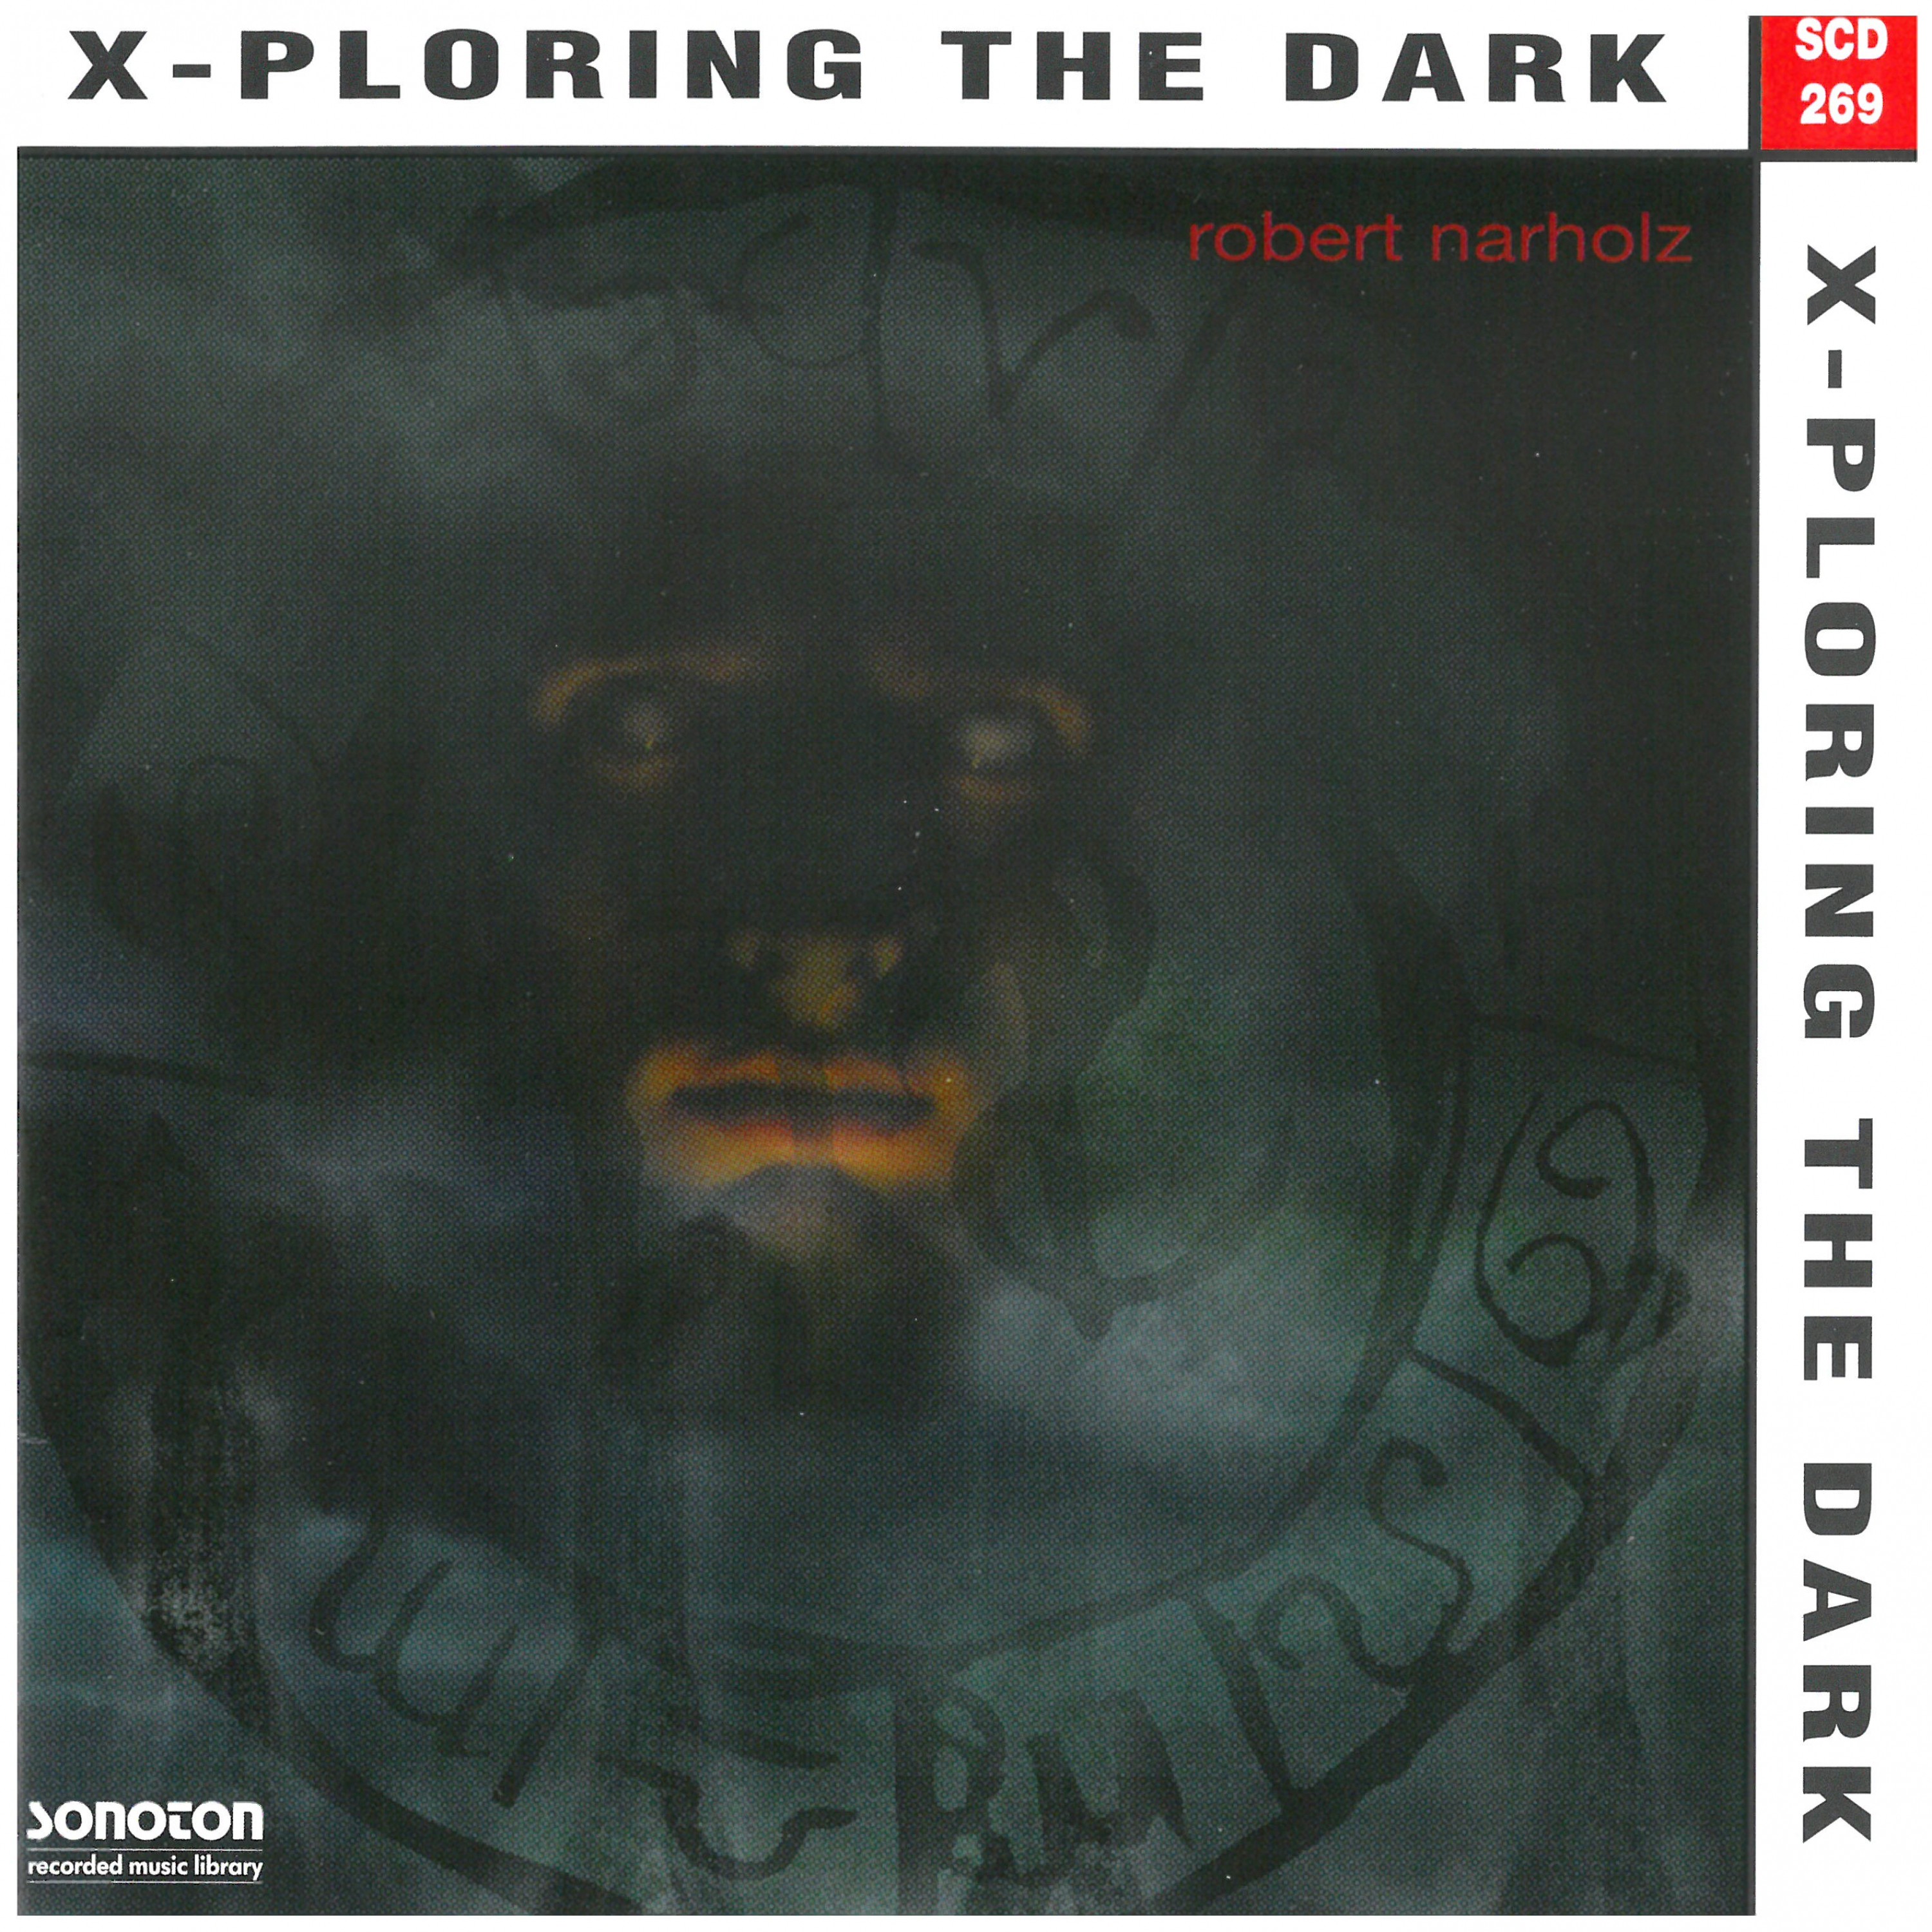 X-Ploring the Dark | Album by Sonoton Film Orchestra and Gregor F. Narholz  | Jaxsta - Overview